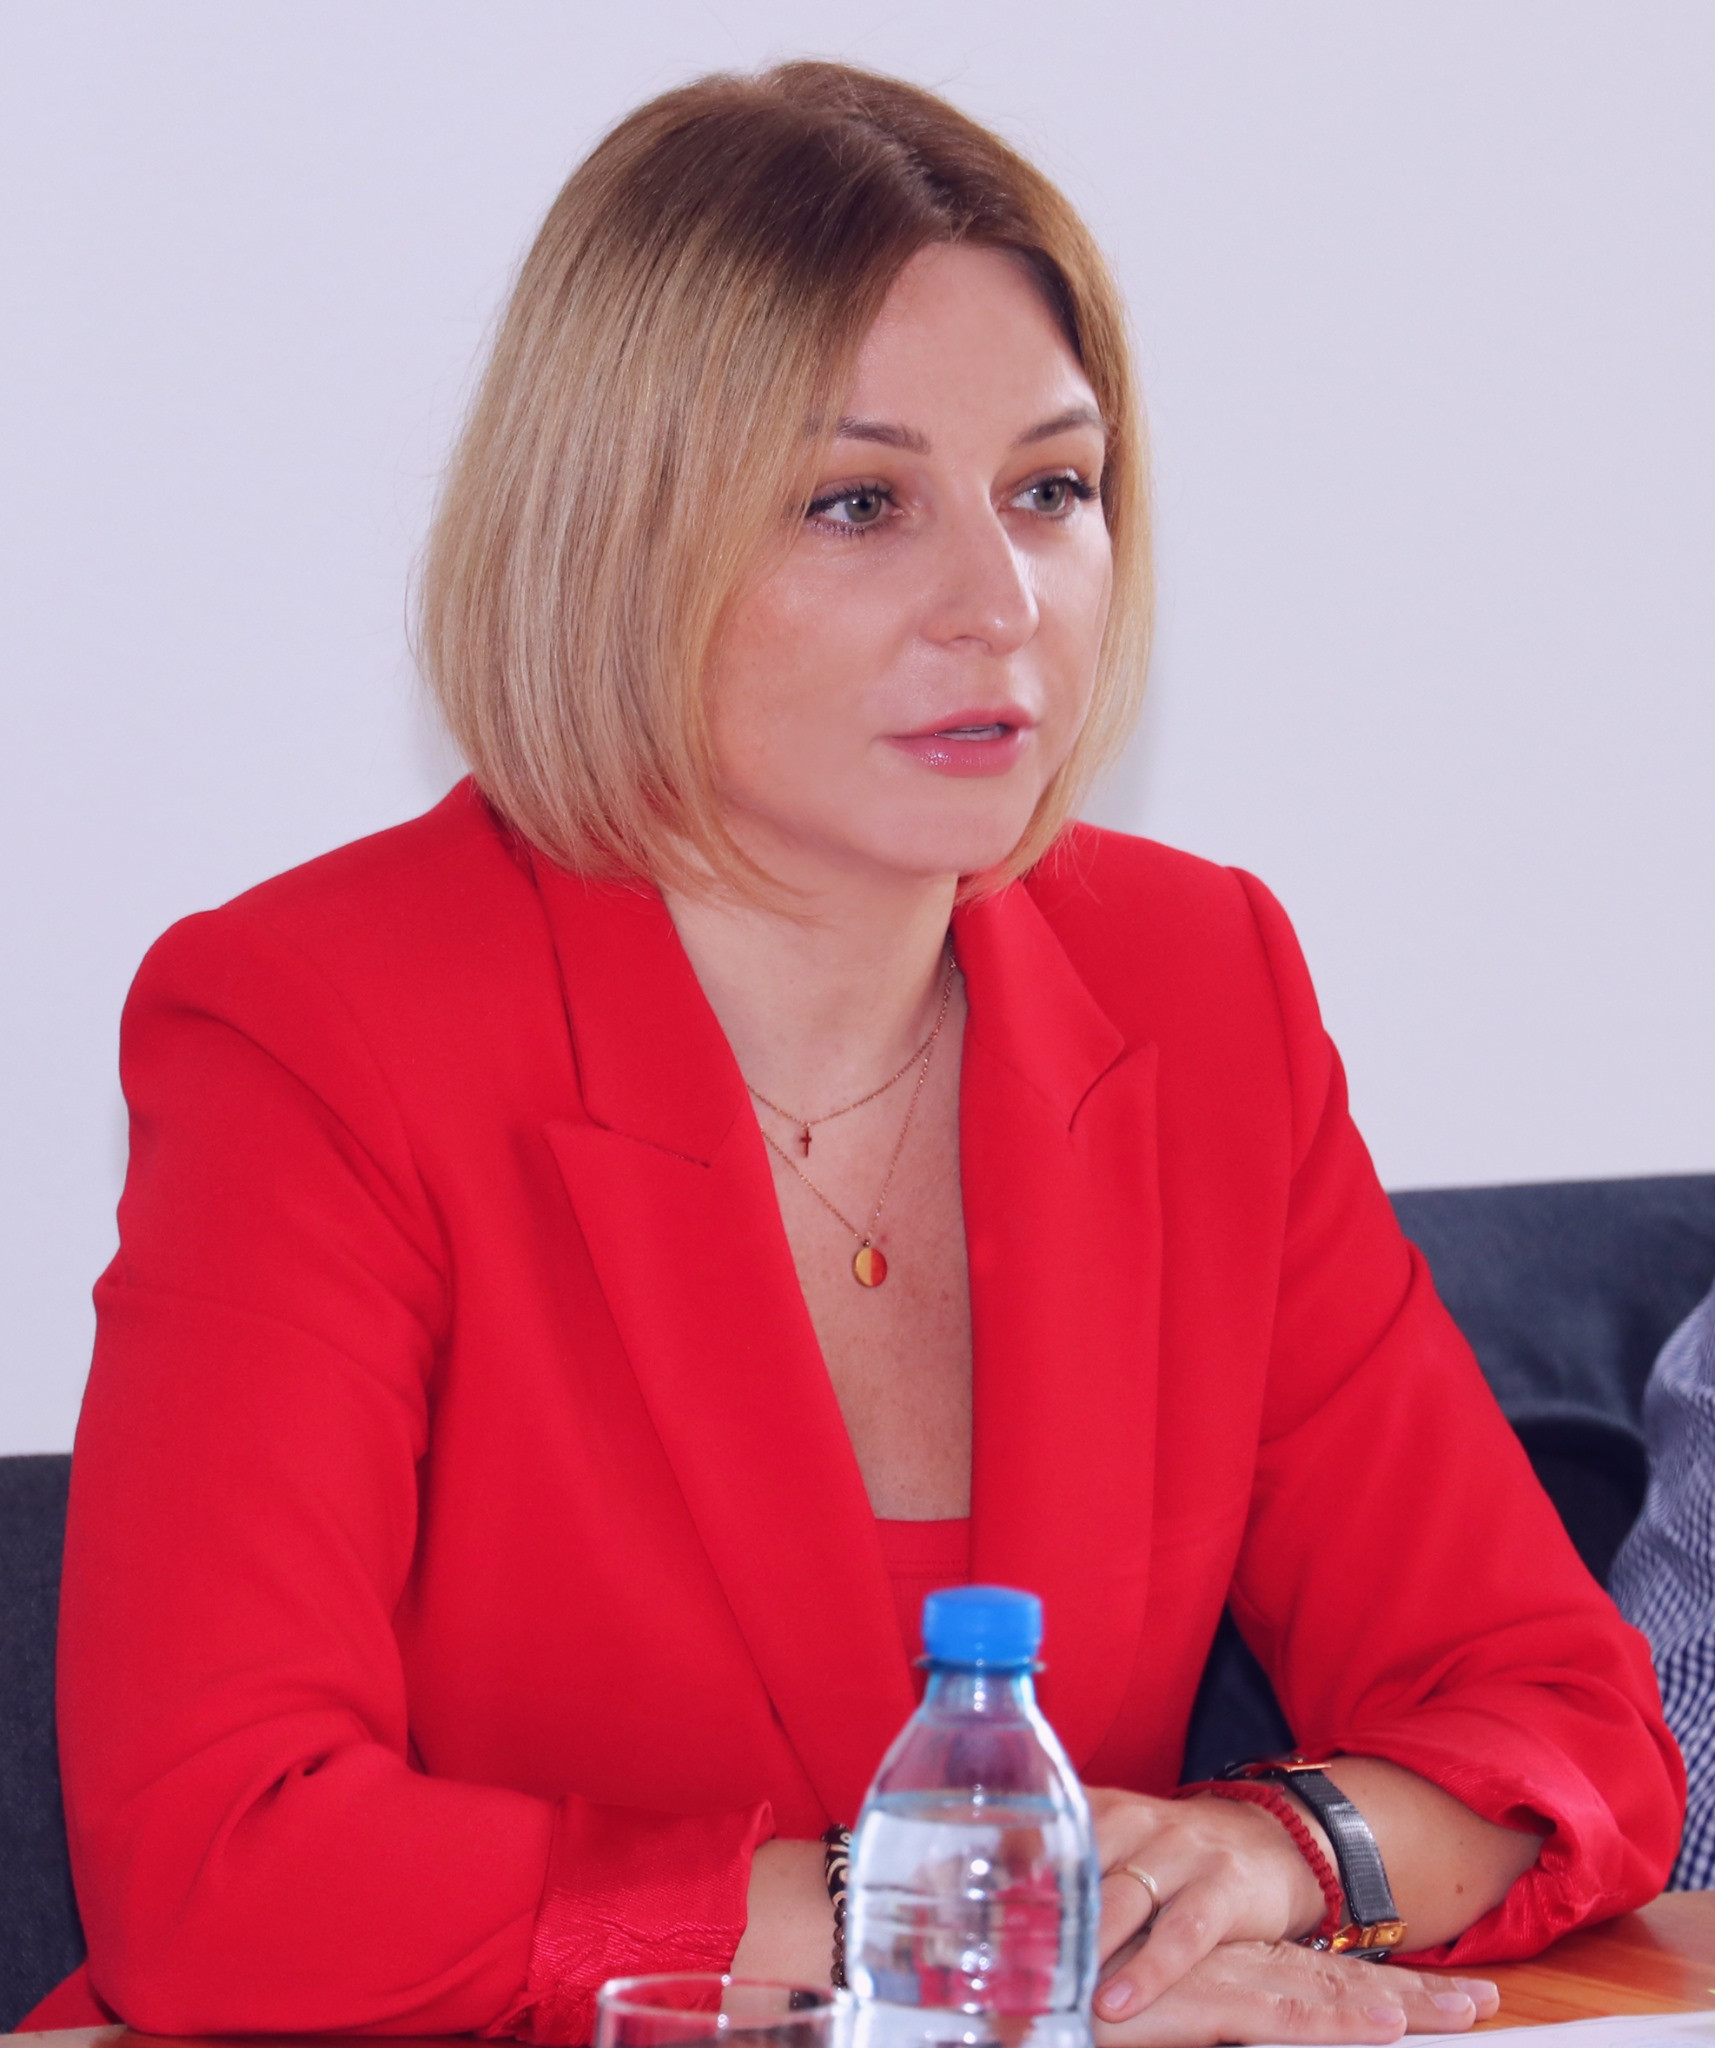 Belarus Chess Federation President and FIDE vice-president Anastasia Sorokina has been supportive of the anti-Government protests in her country ©Facebook